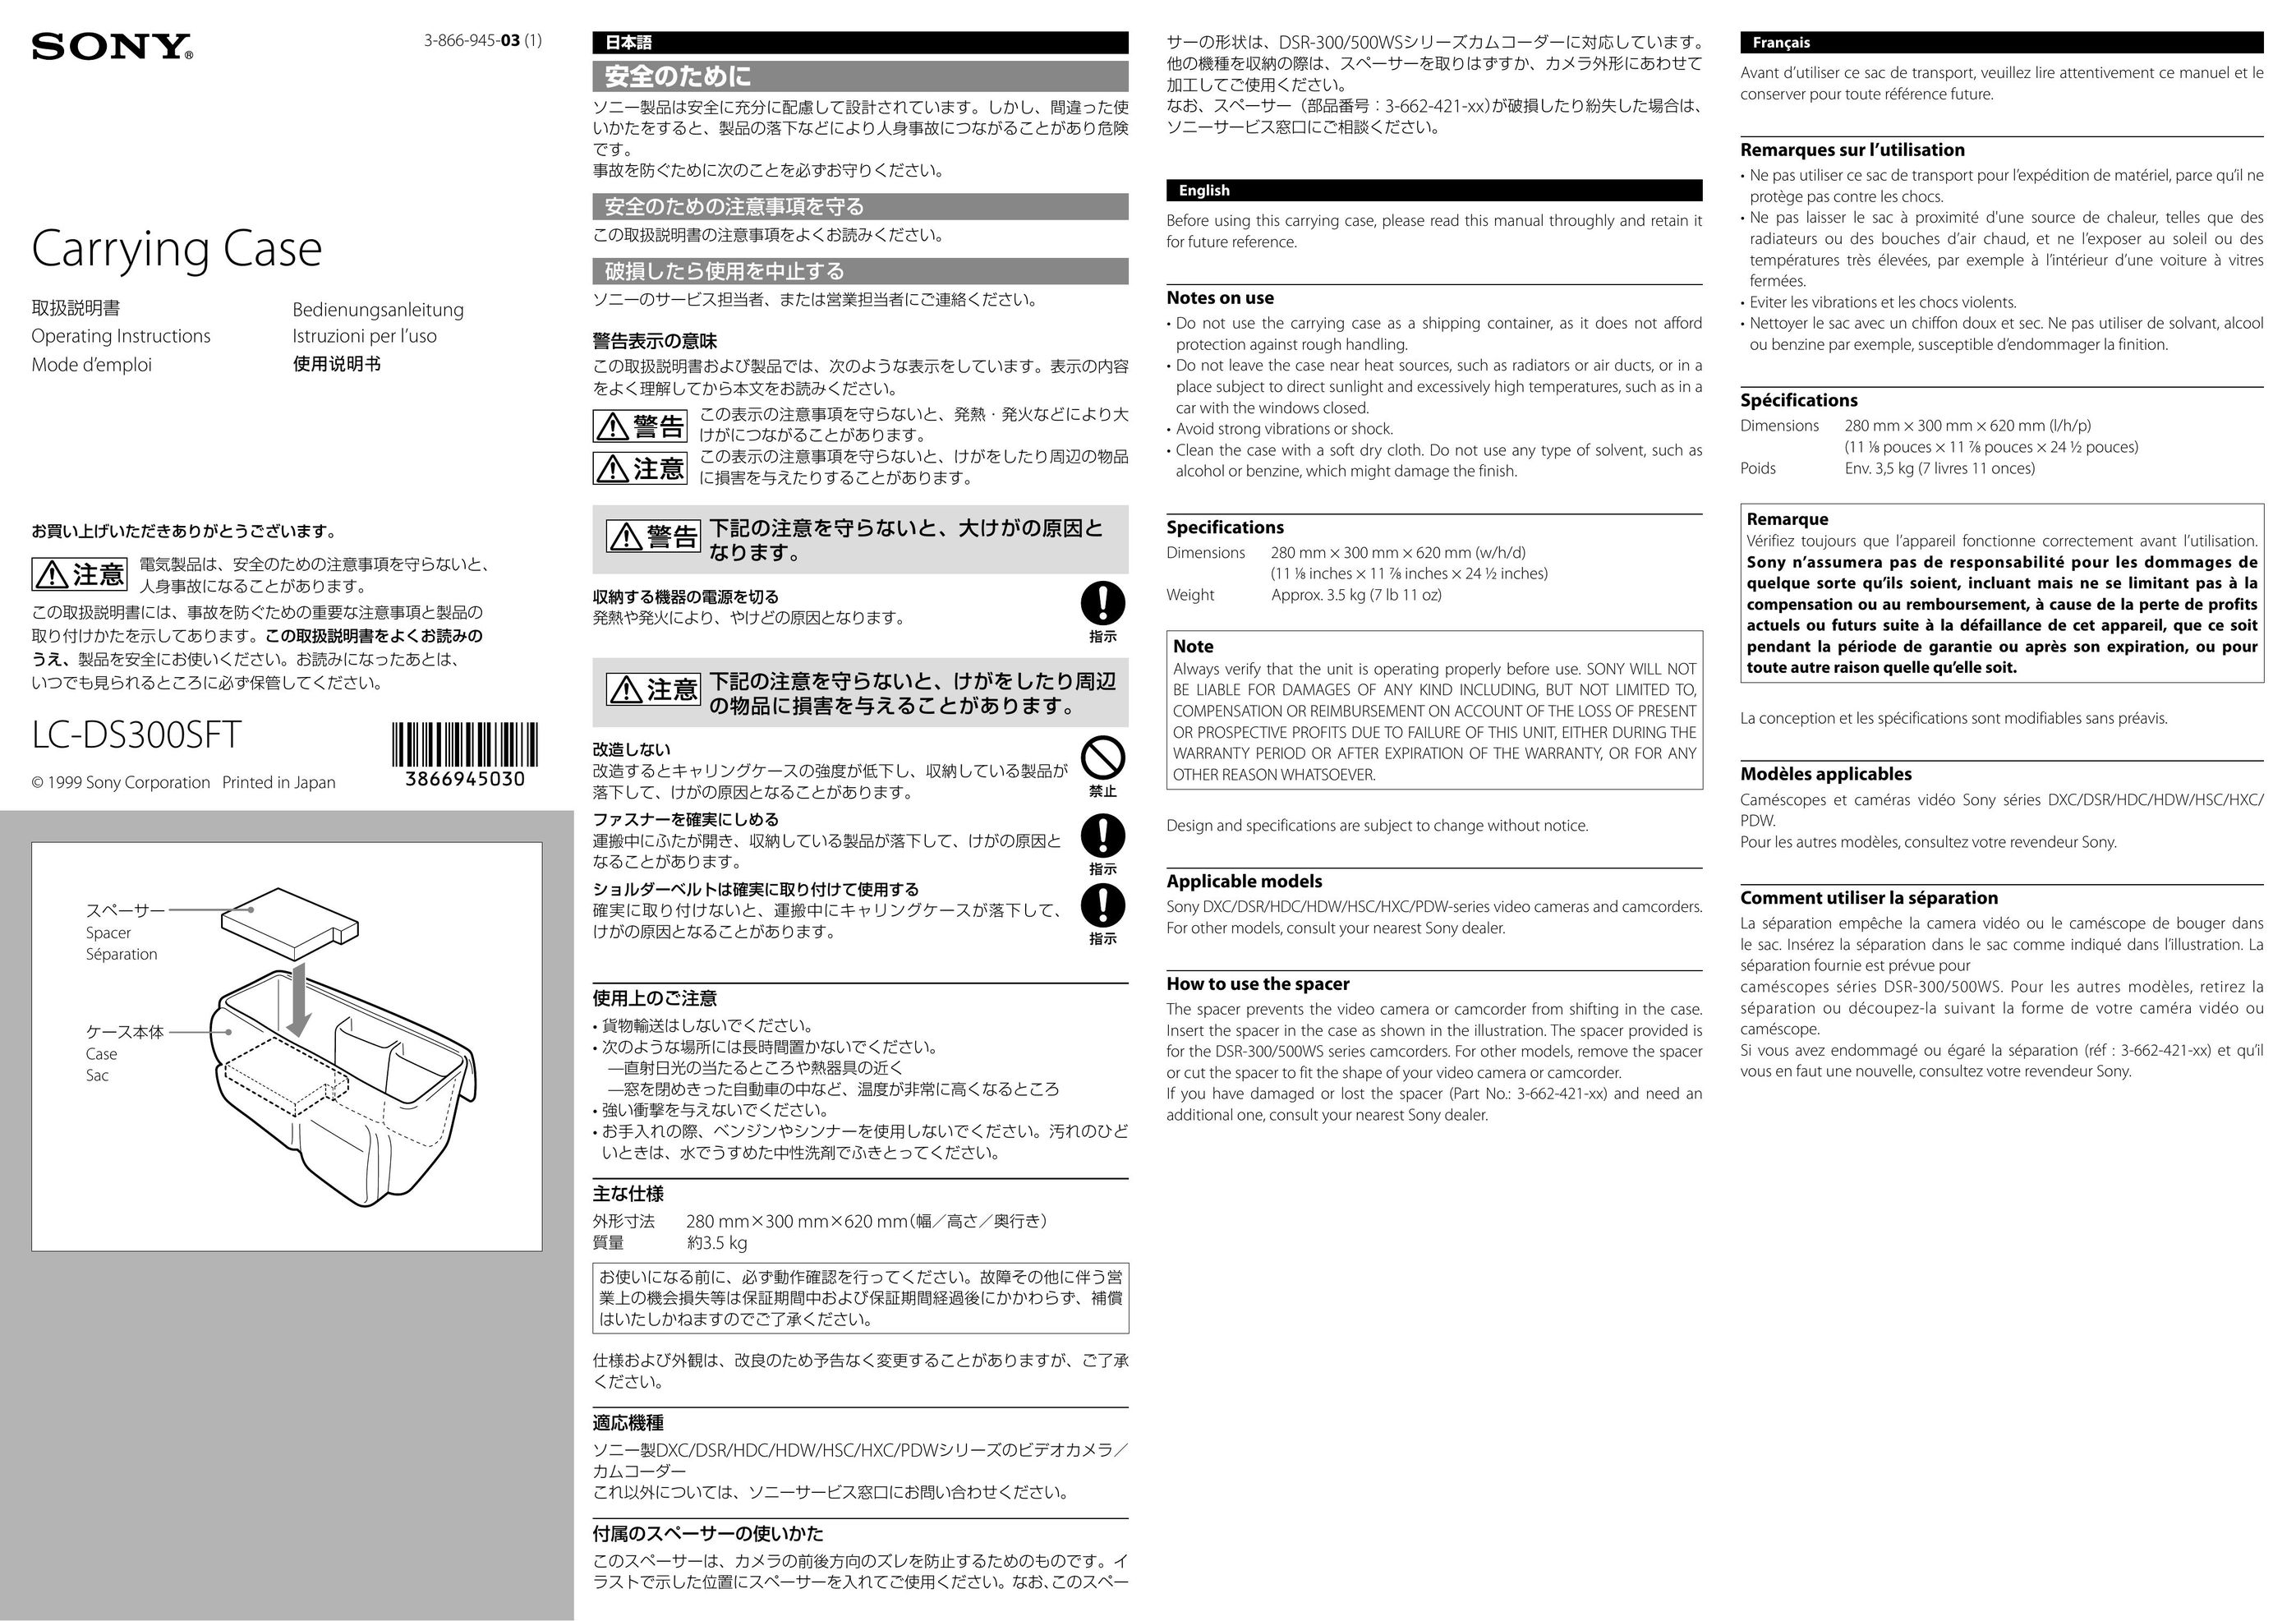 Sony LC-DS300SFT Carrying Case User Manual